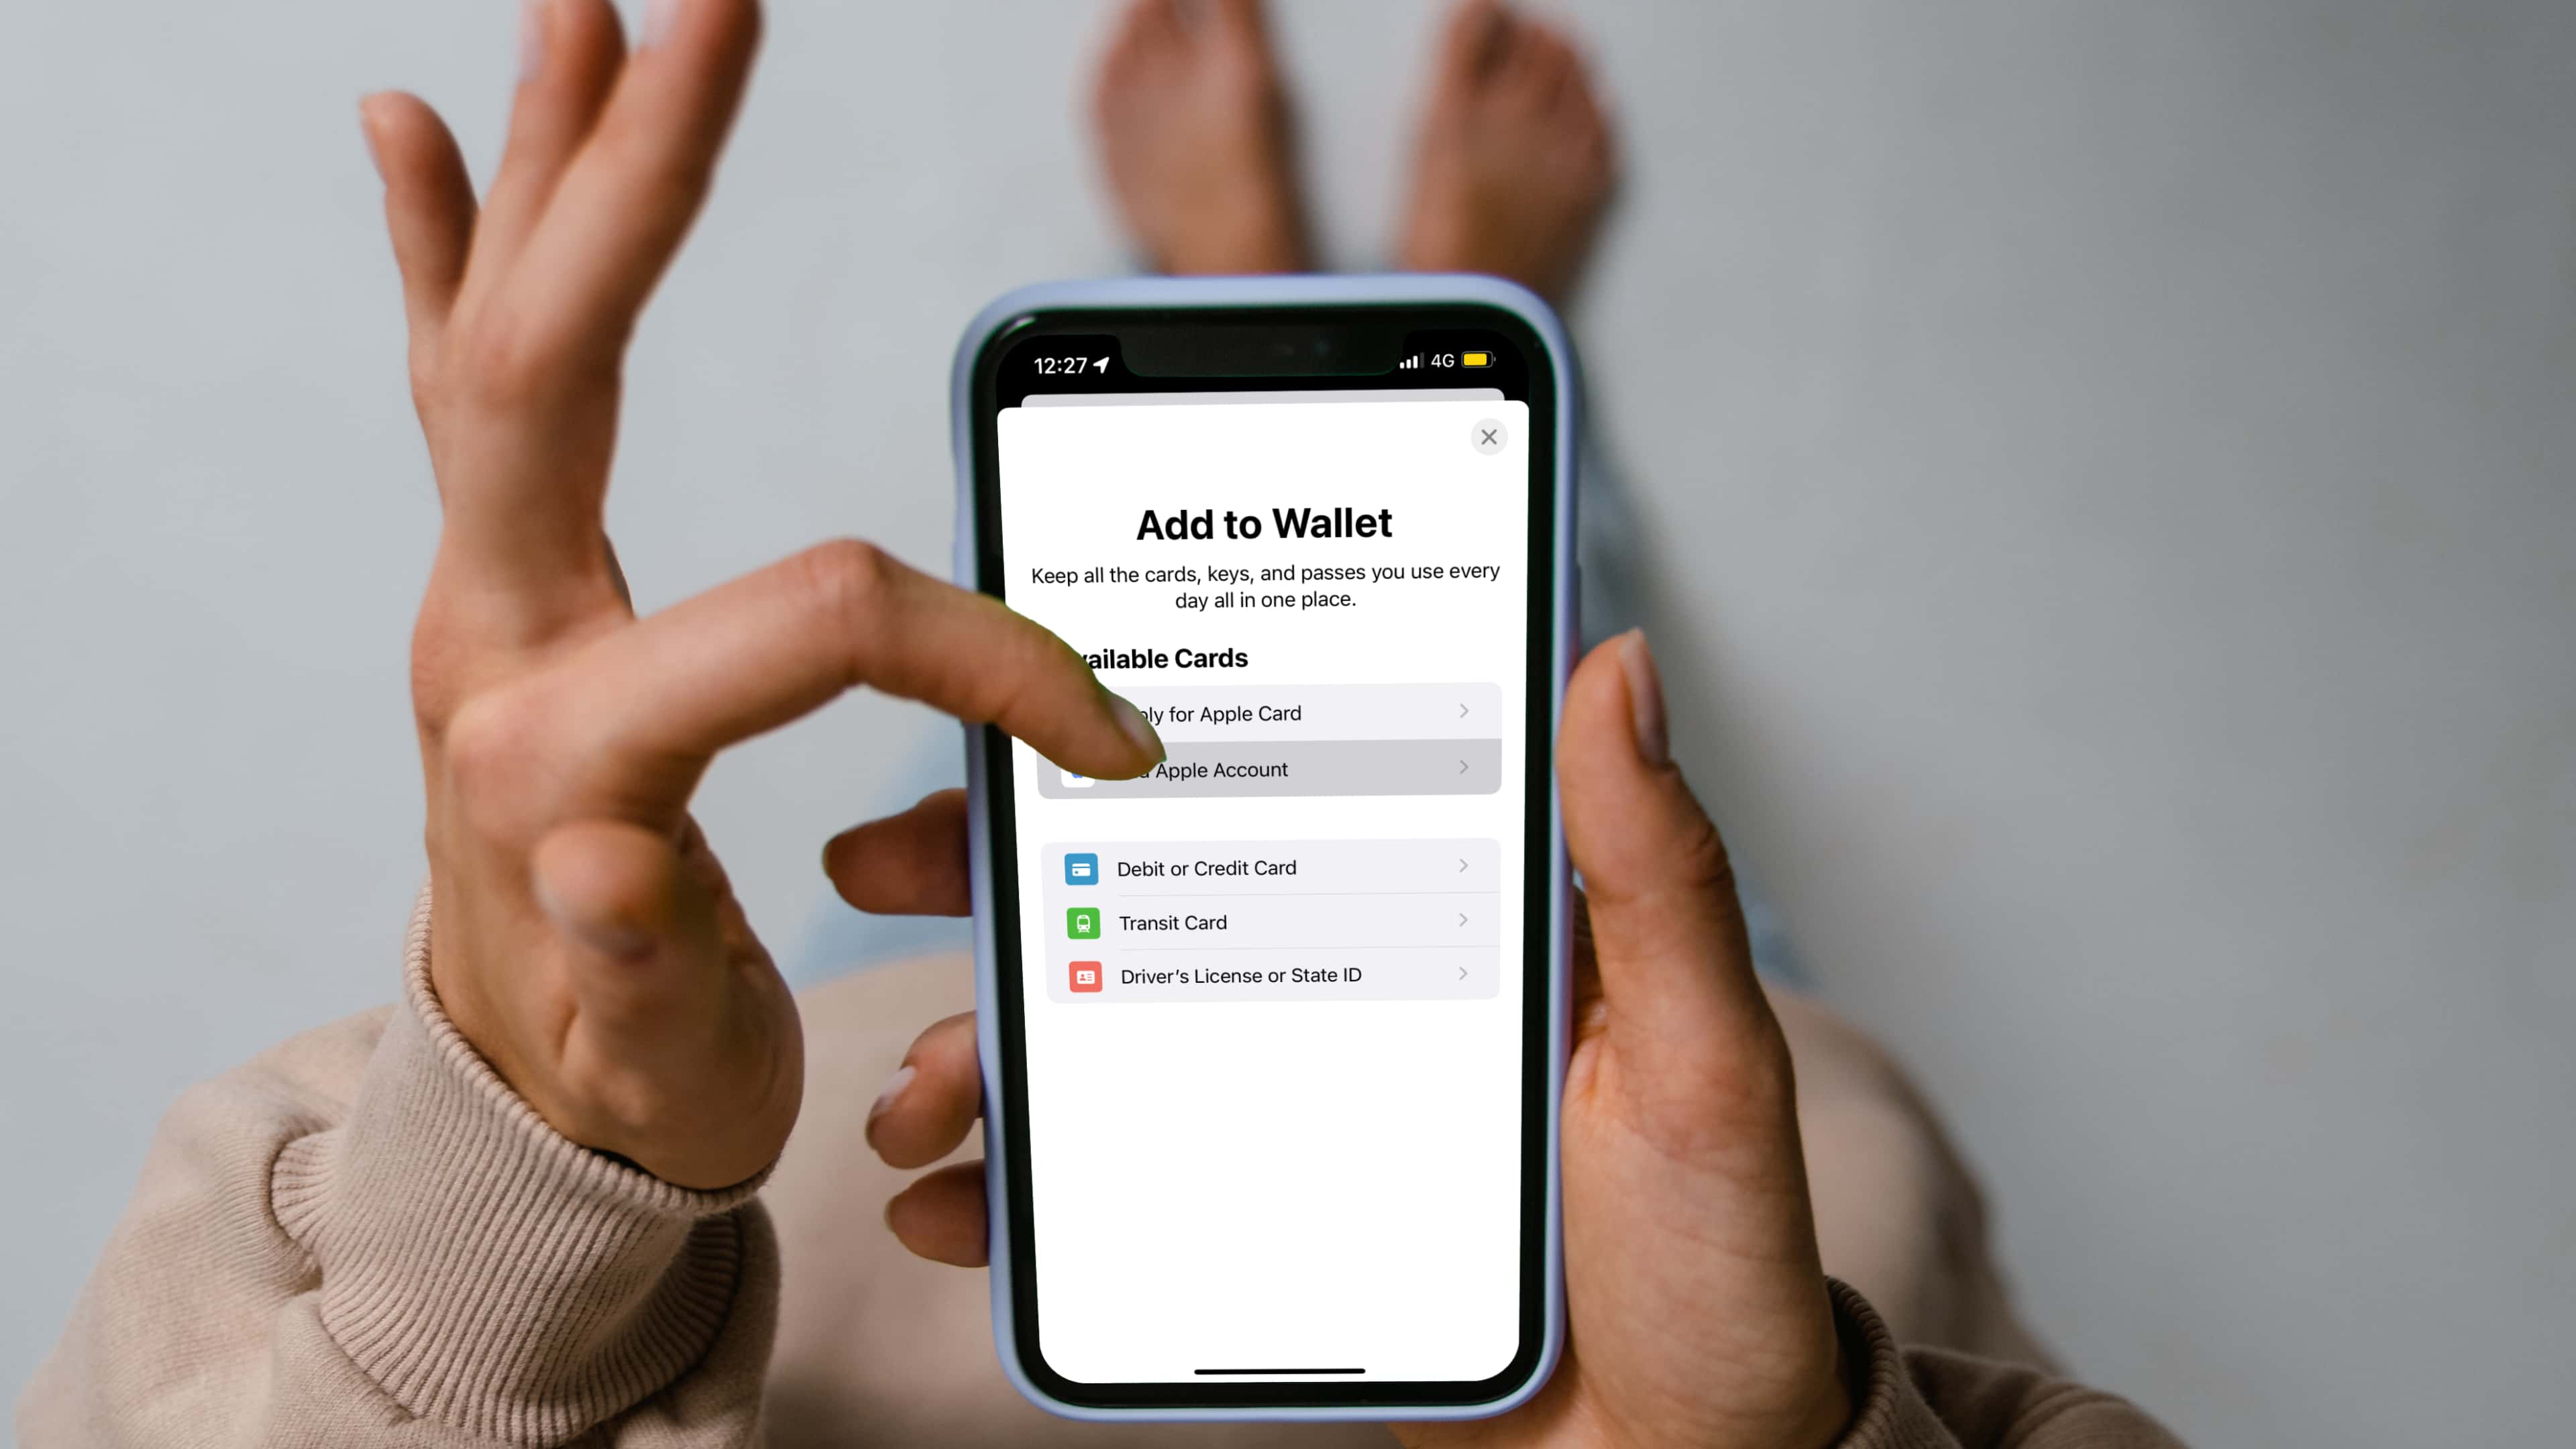 This mockup illustrates adding an Apple Account card to the iPhone's Wallet app on iOS 15.5 and later